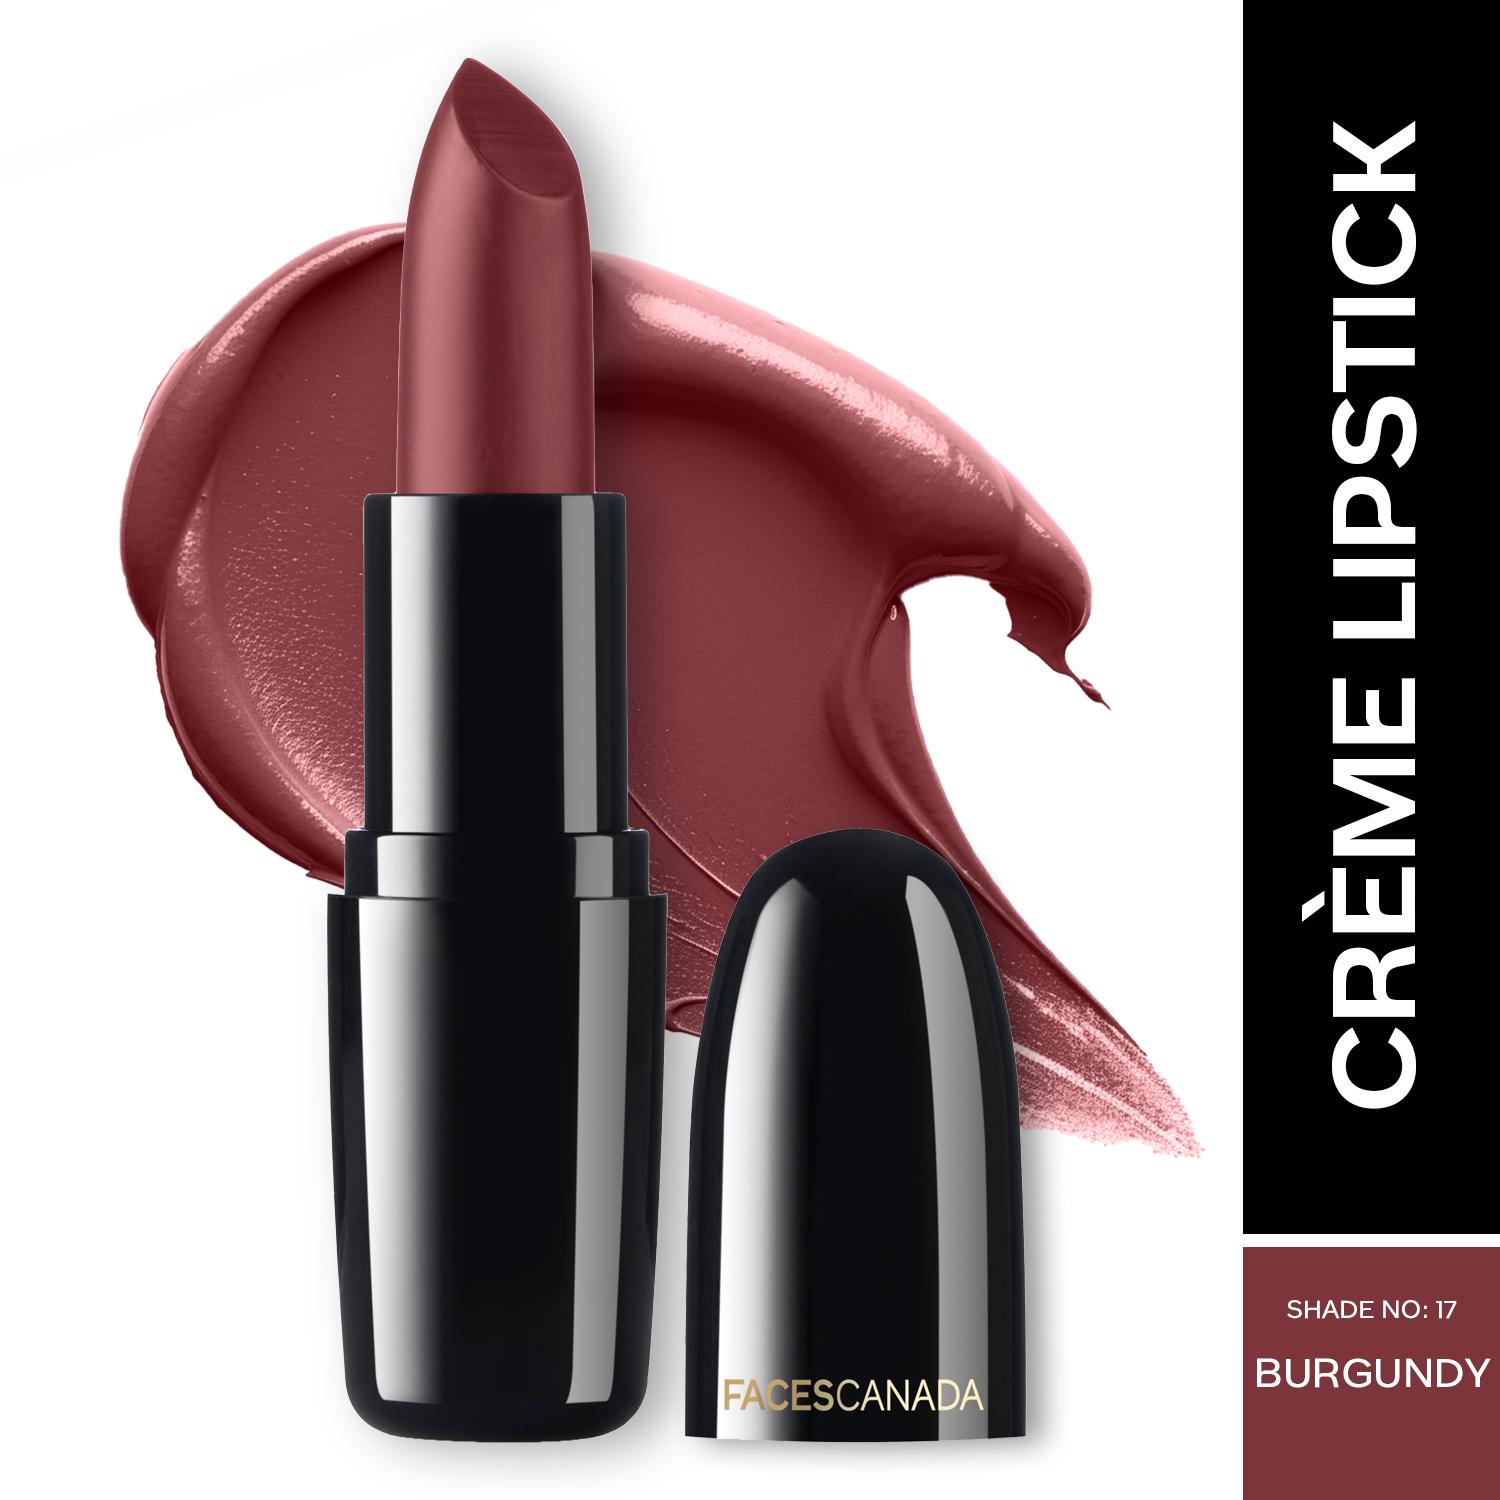 Faces Canada | Faces Canada Weightless Creme Finish Lipstick, Creamy Finish, Hydrated Lips - Burgundy 17 (4 g)